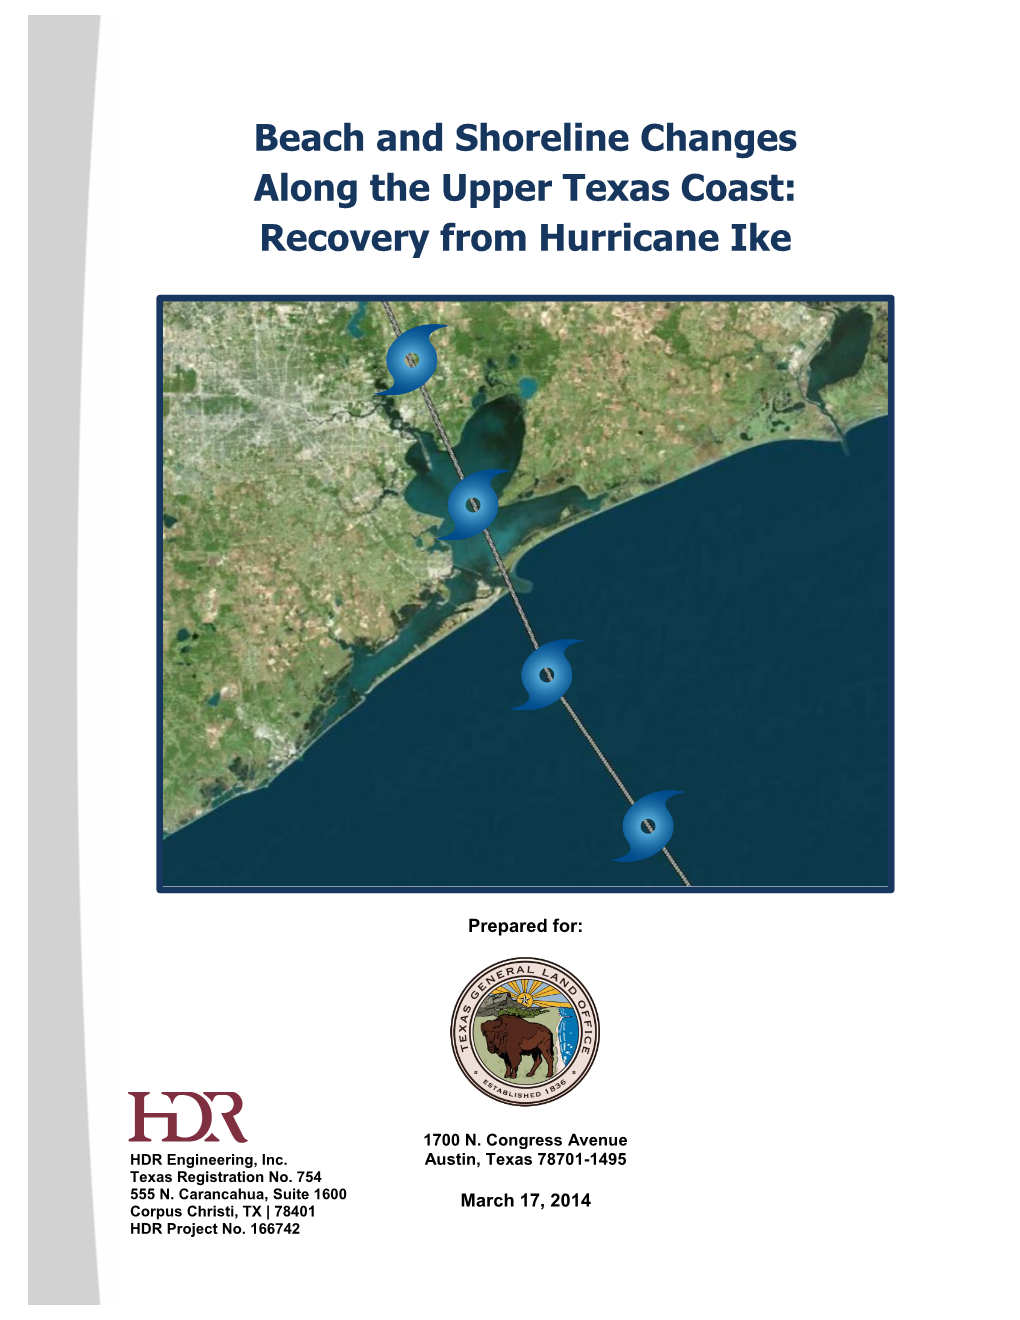 Beach and Shoreline Changes Along the Upper Texas Coast: Recovery from Hurricane Ike